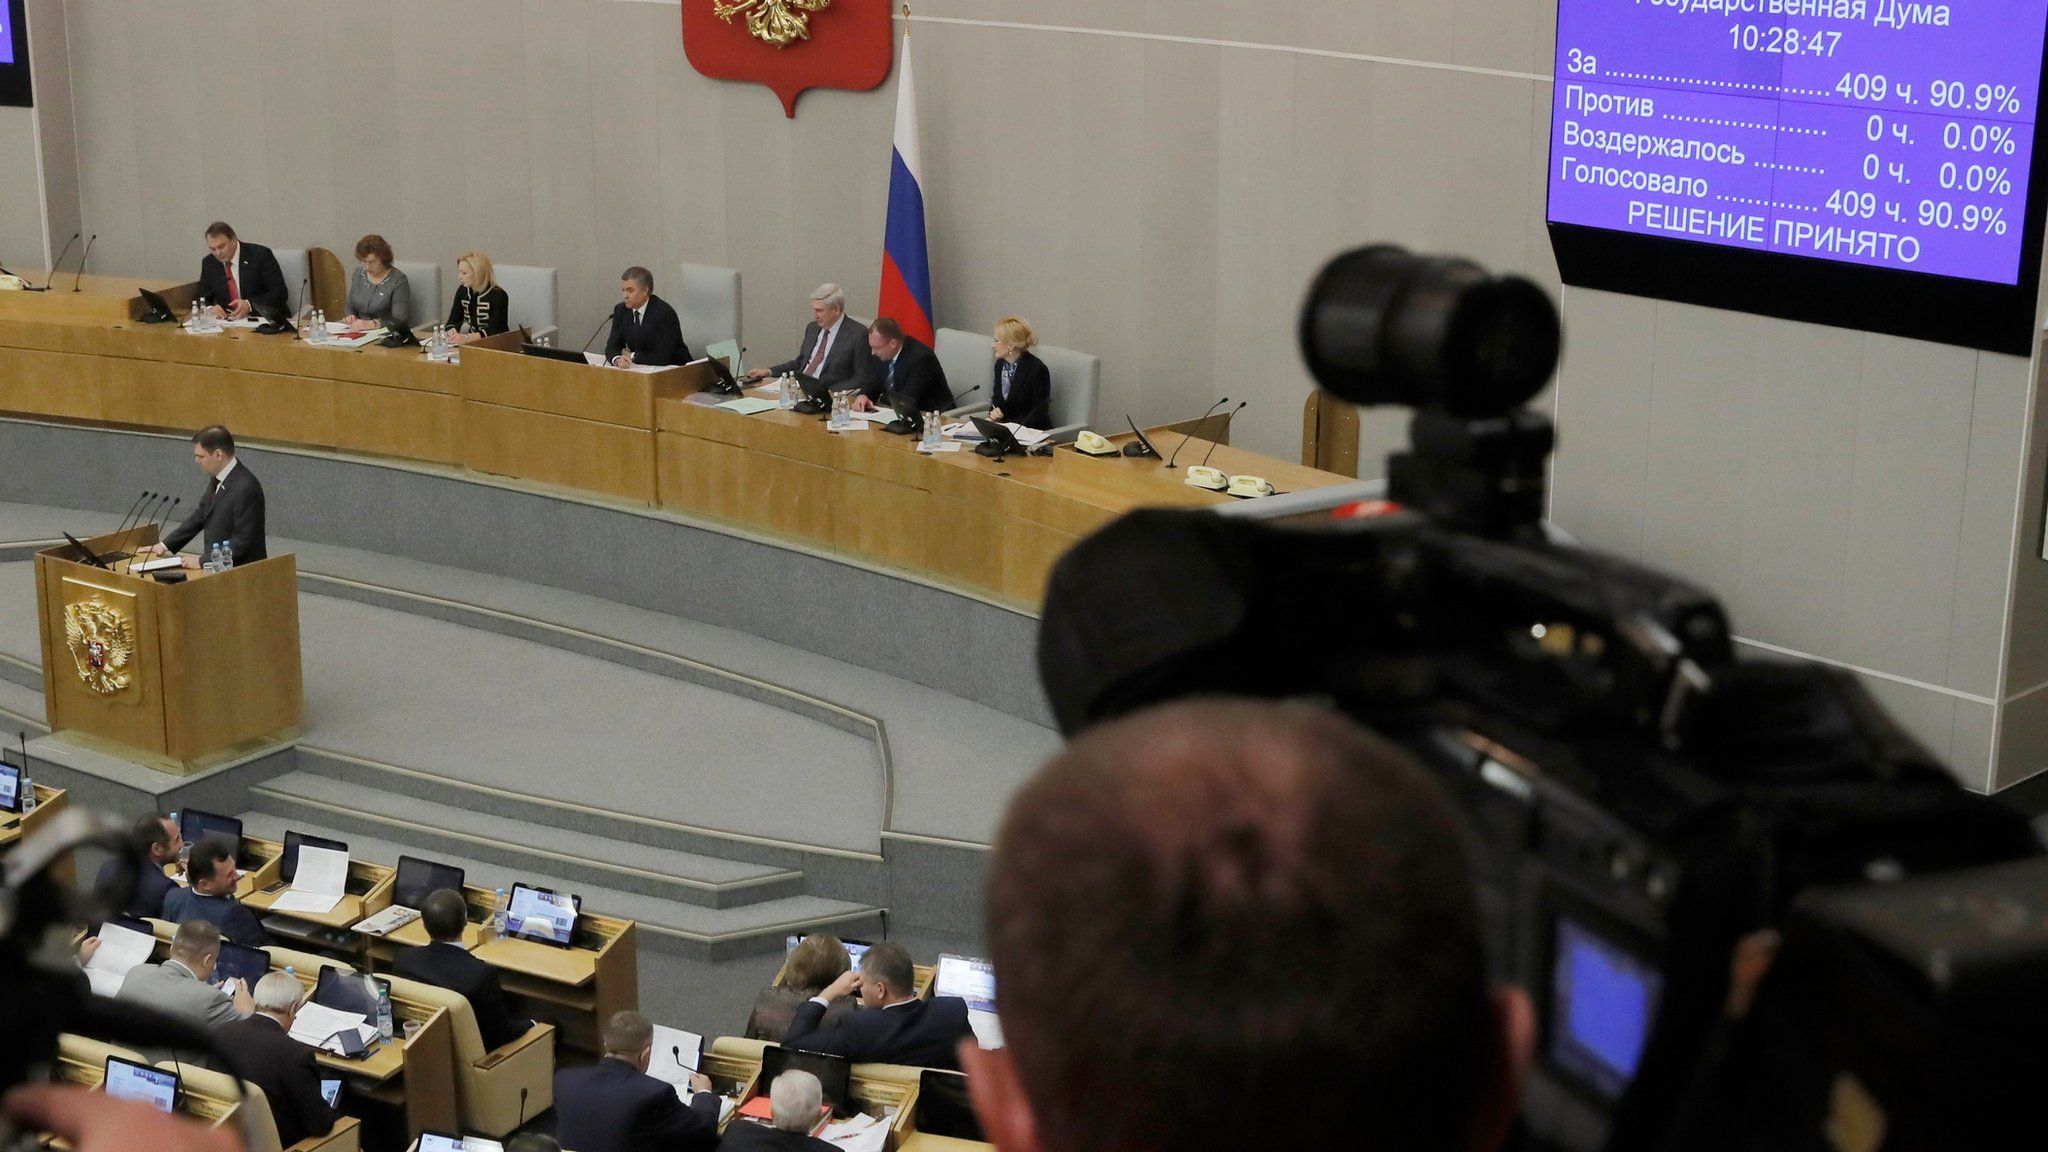 The screens show the results of vote on the draft of amendments to the Russia's Law on Media